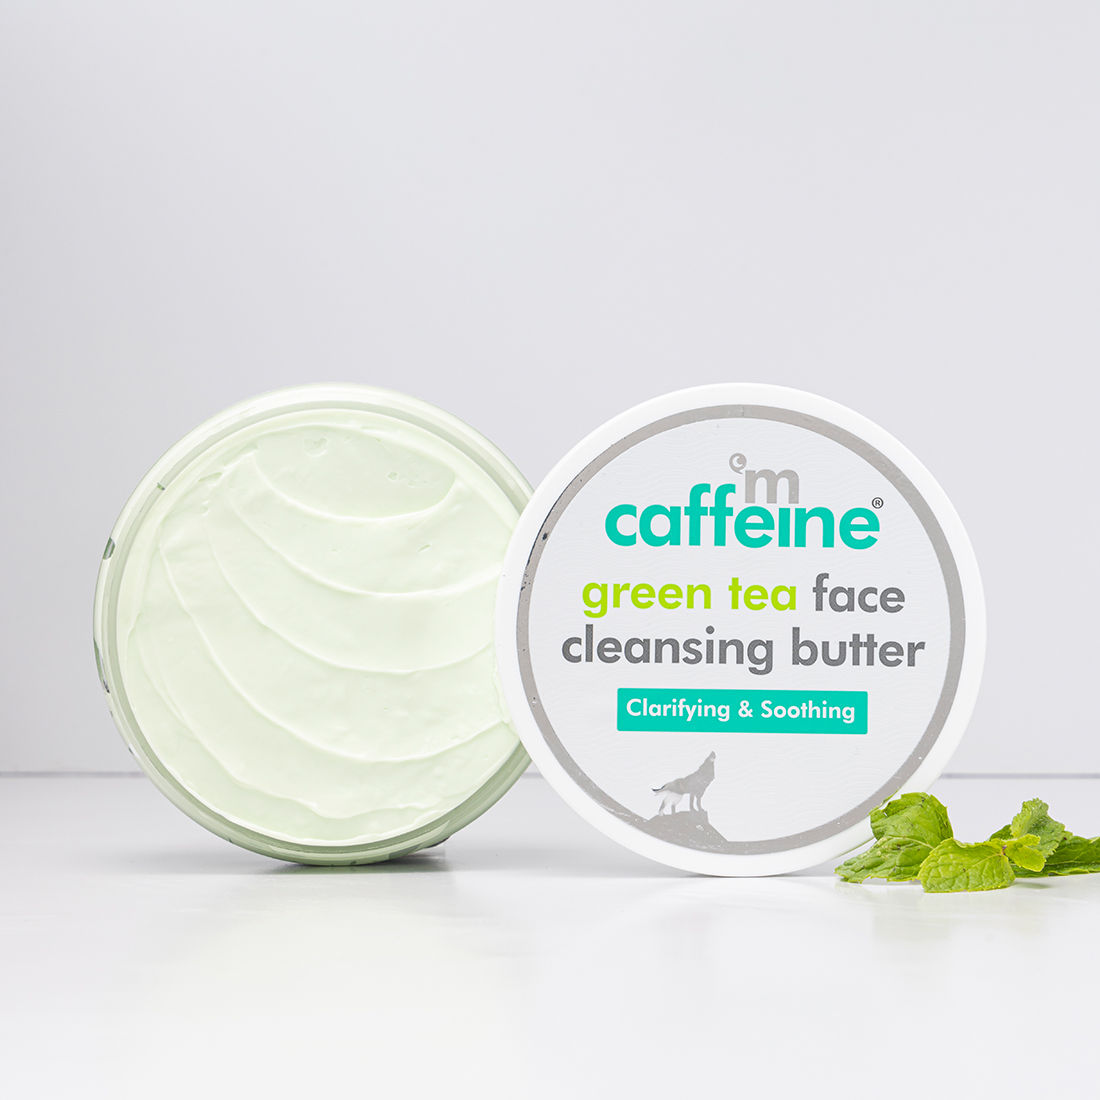 Buy mCaffeine Green Tea Face Cleansing Butter with Shea Butter & Vit E| Moisturizing & Gentle Makeup Remover & Face Cleanser | For All Skin Types - 100g - Purplle